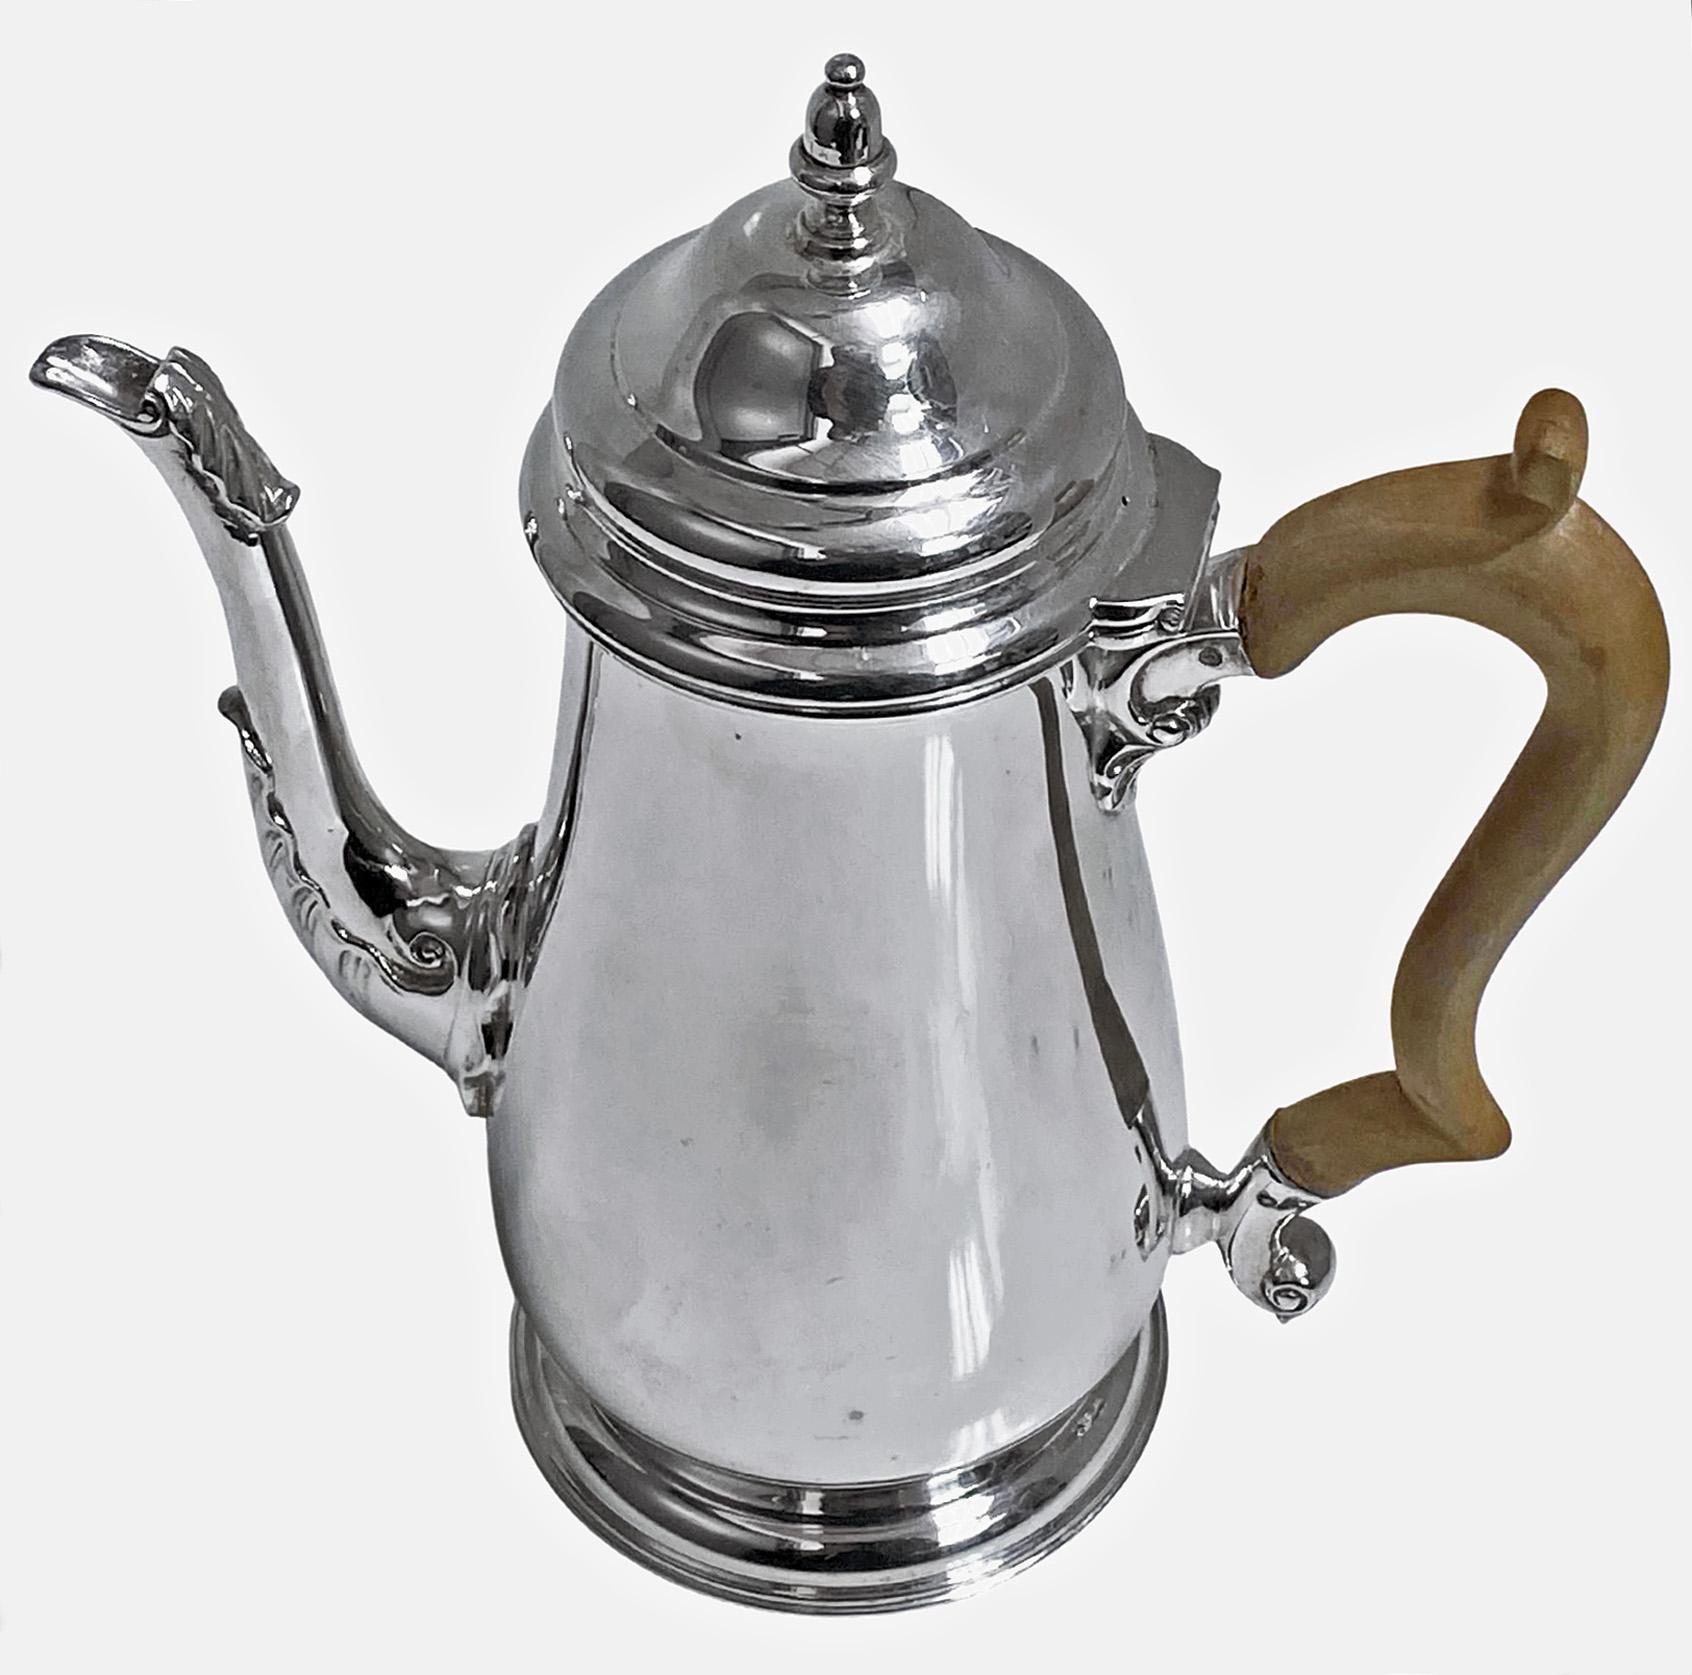 English Georgian style sterling silver coffee pot, London 1965 Wakely and Wheeler. Plain tapered body on pedestal circular foot. The domed, hinged cover lid with silver campana finial, the spout accented with acanthus foliage, fruitwood handle. Full